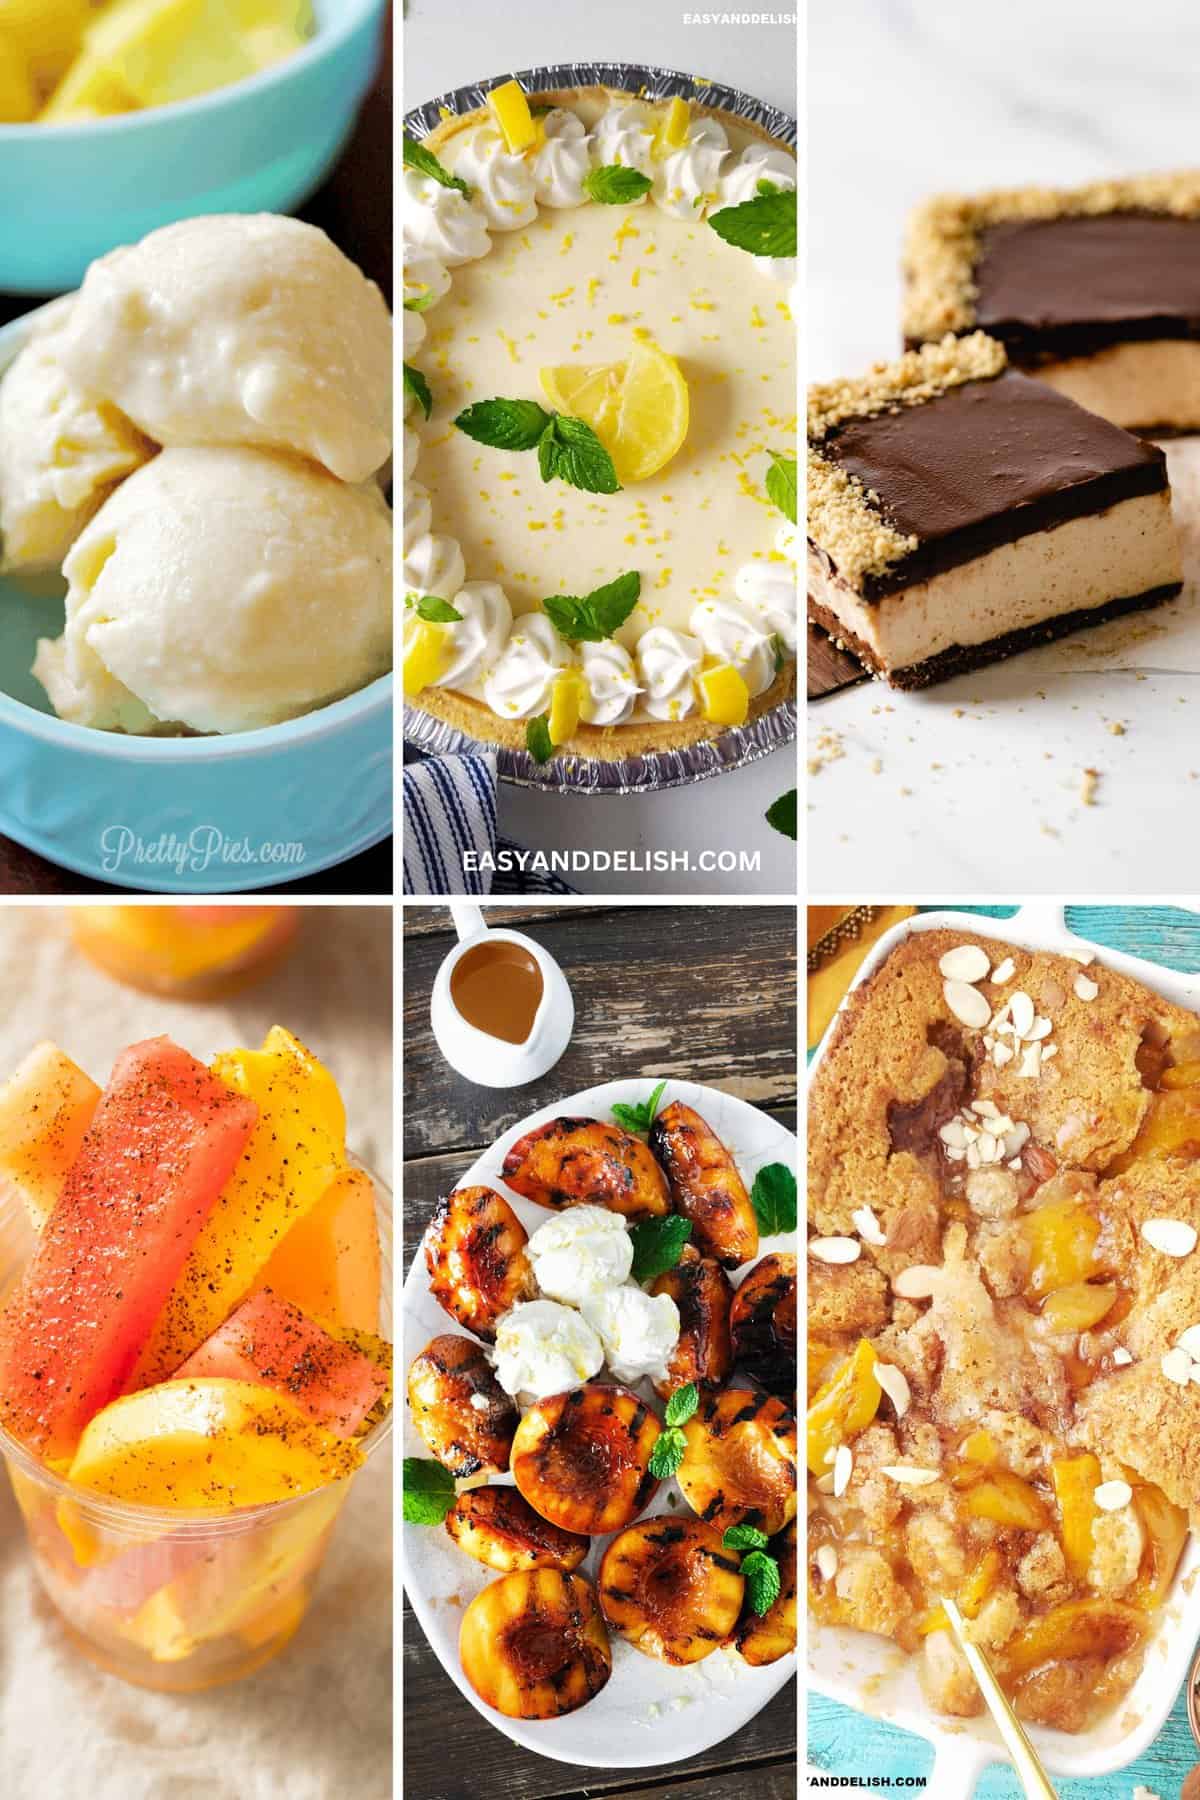 Collage showing 6 out of 22 summer desserts, incuding cobbler, grilled peaches, fruit cus, sorbet, icebox pie, and no-bake cheesecake.